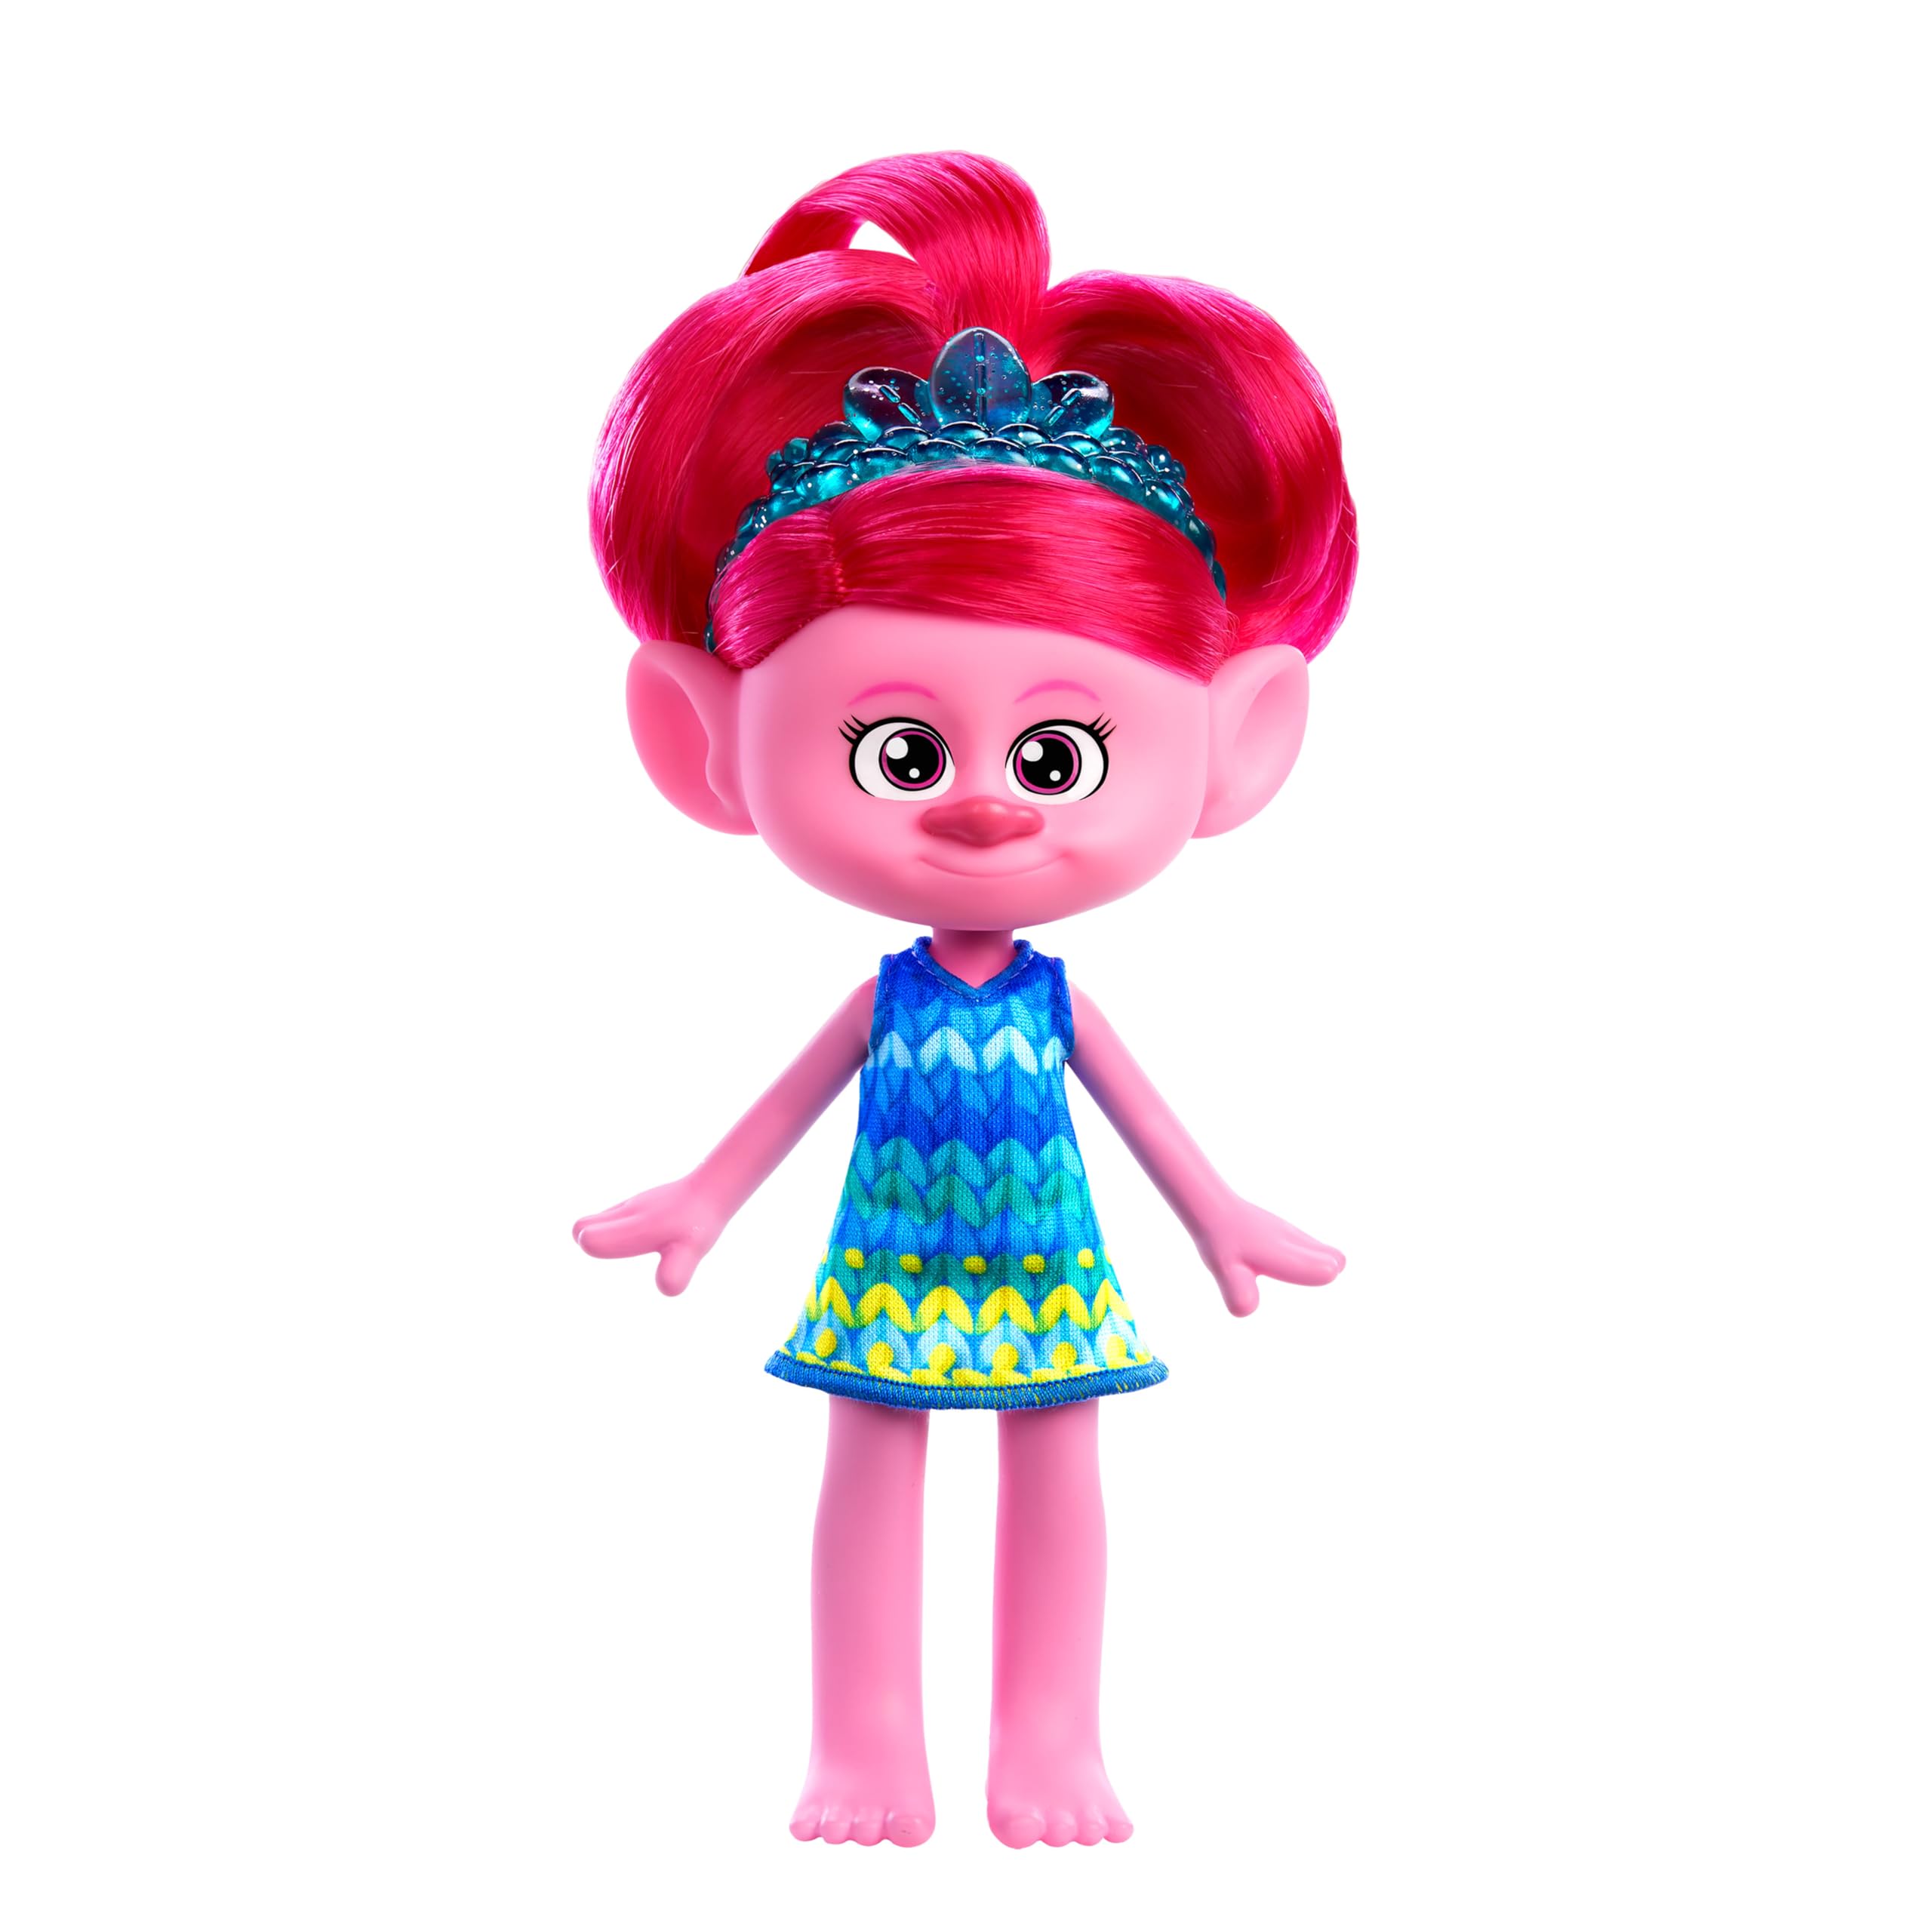 Mattel Trolls Band Together Trendsettin’ Fashion Dolls with Vibrant Hair & Accessory, Toys Inspired by the Movie